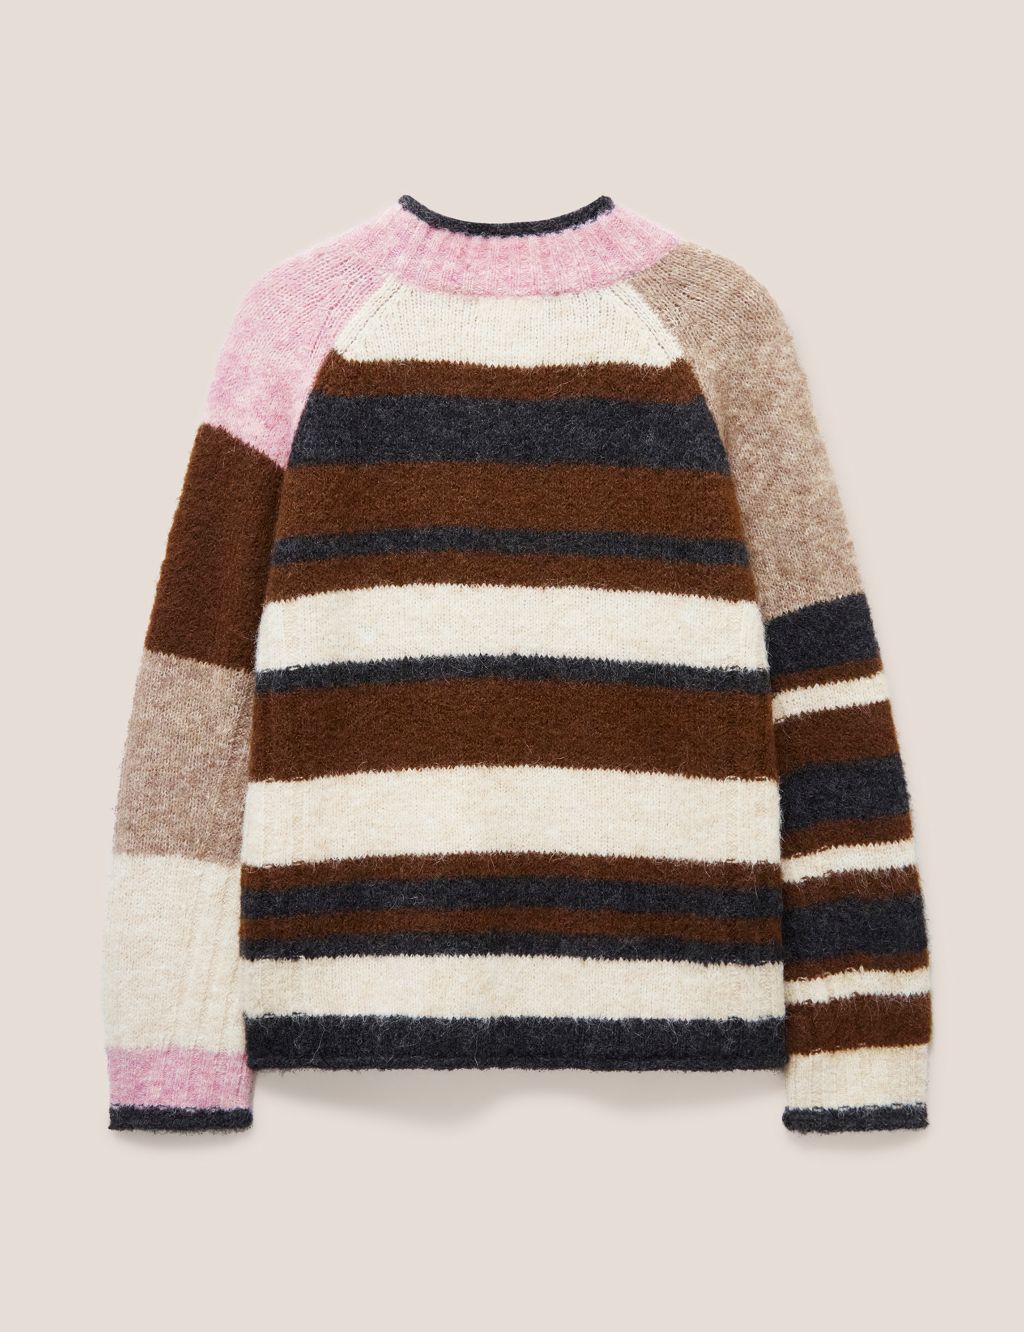 Colour Block Crew Neck Jumper with Wool image 6